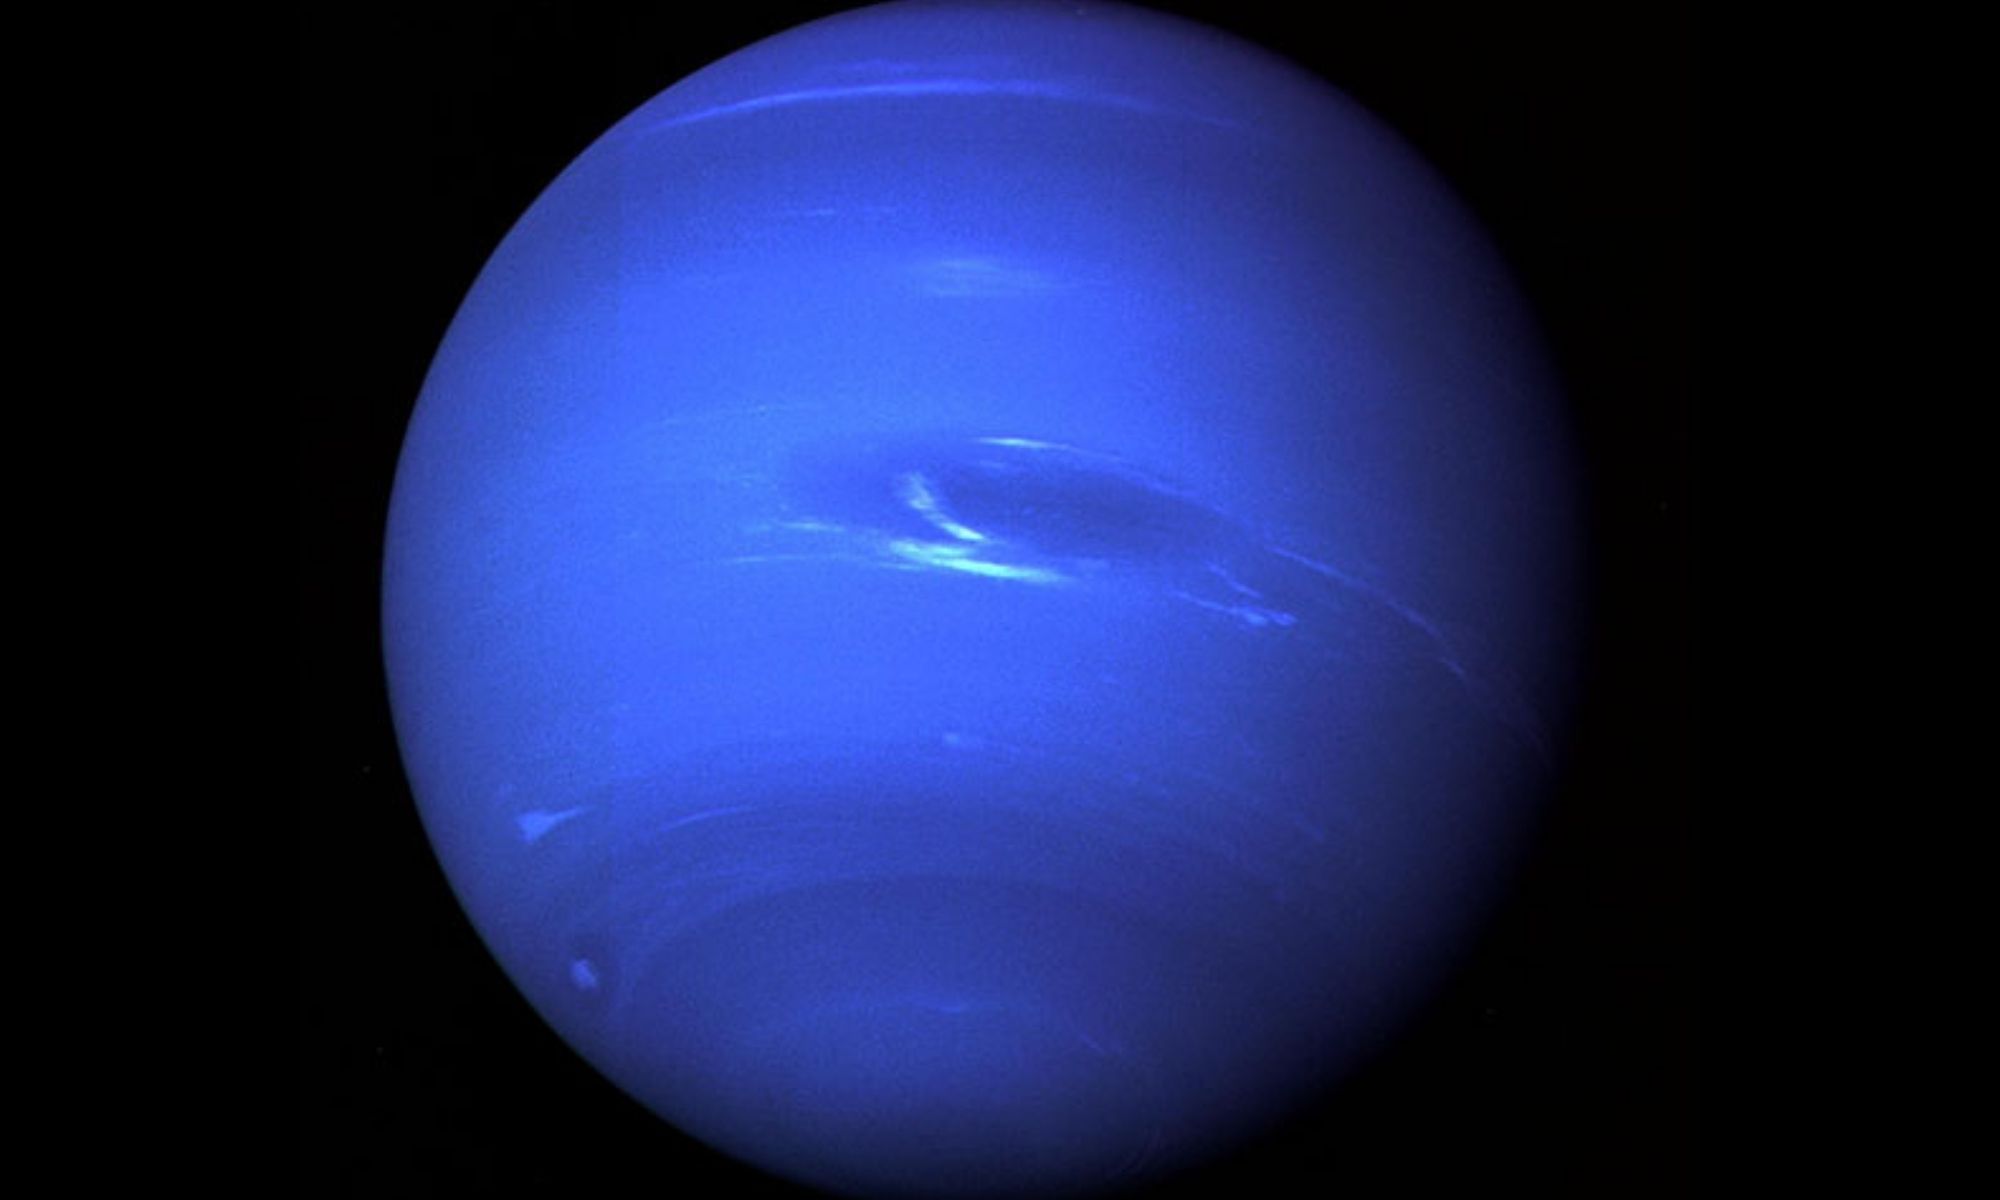 Artist's Concept Of Planet Neptune Is The Eight Planet In Our Solar System  And Has Planetary Rings And A Great Dark Spot Indicating A Storm |  surprizeflori.md